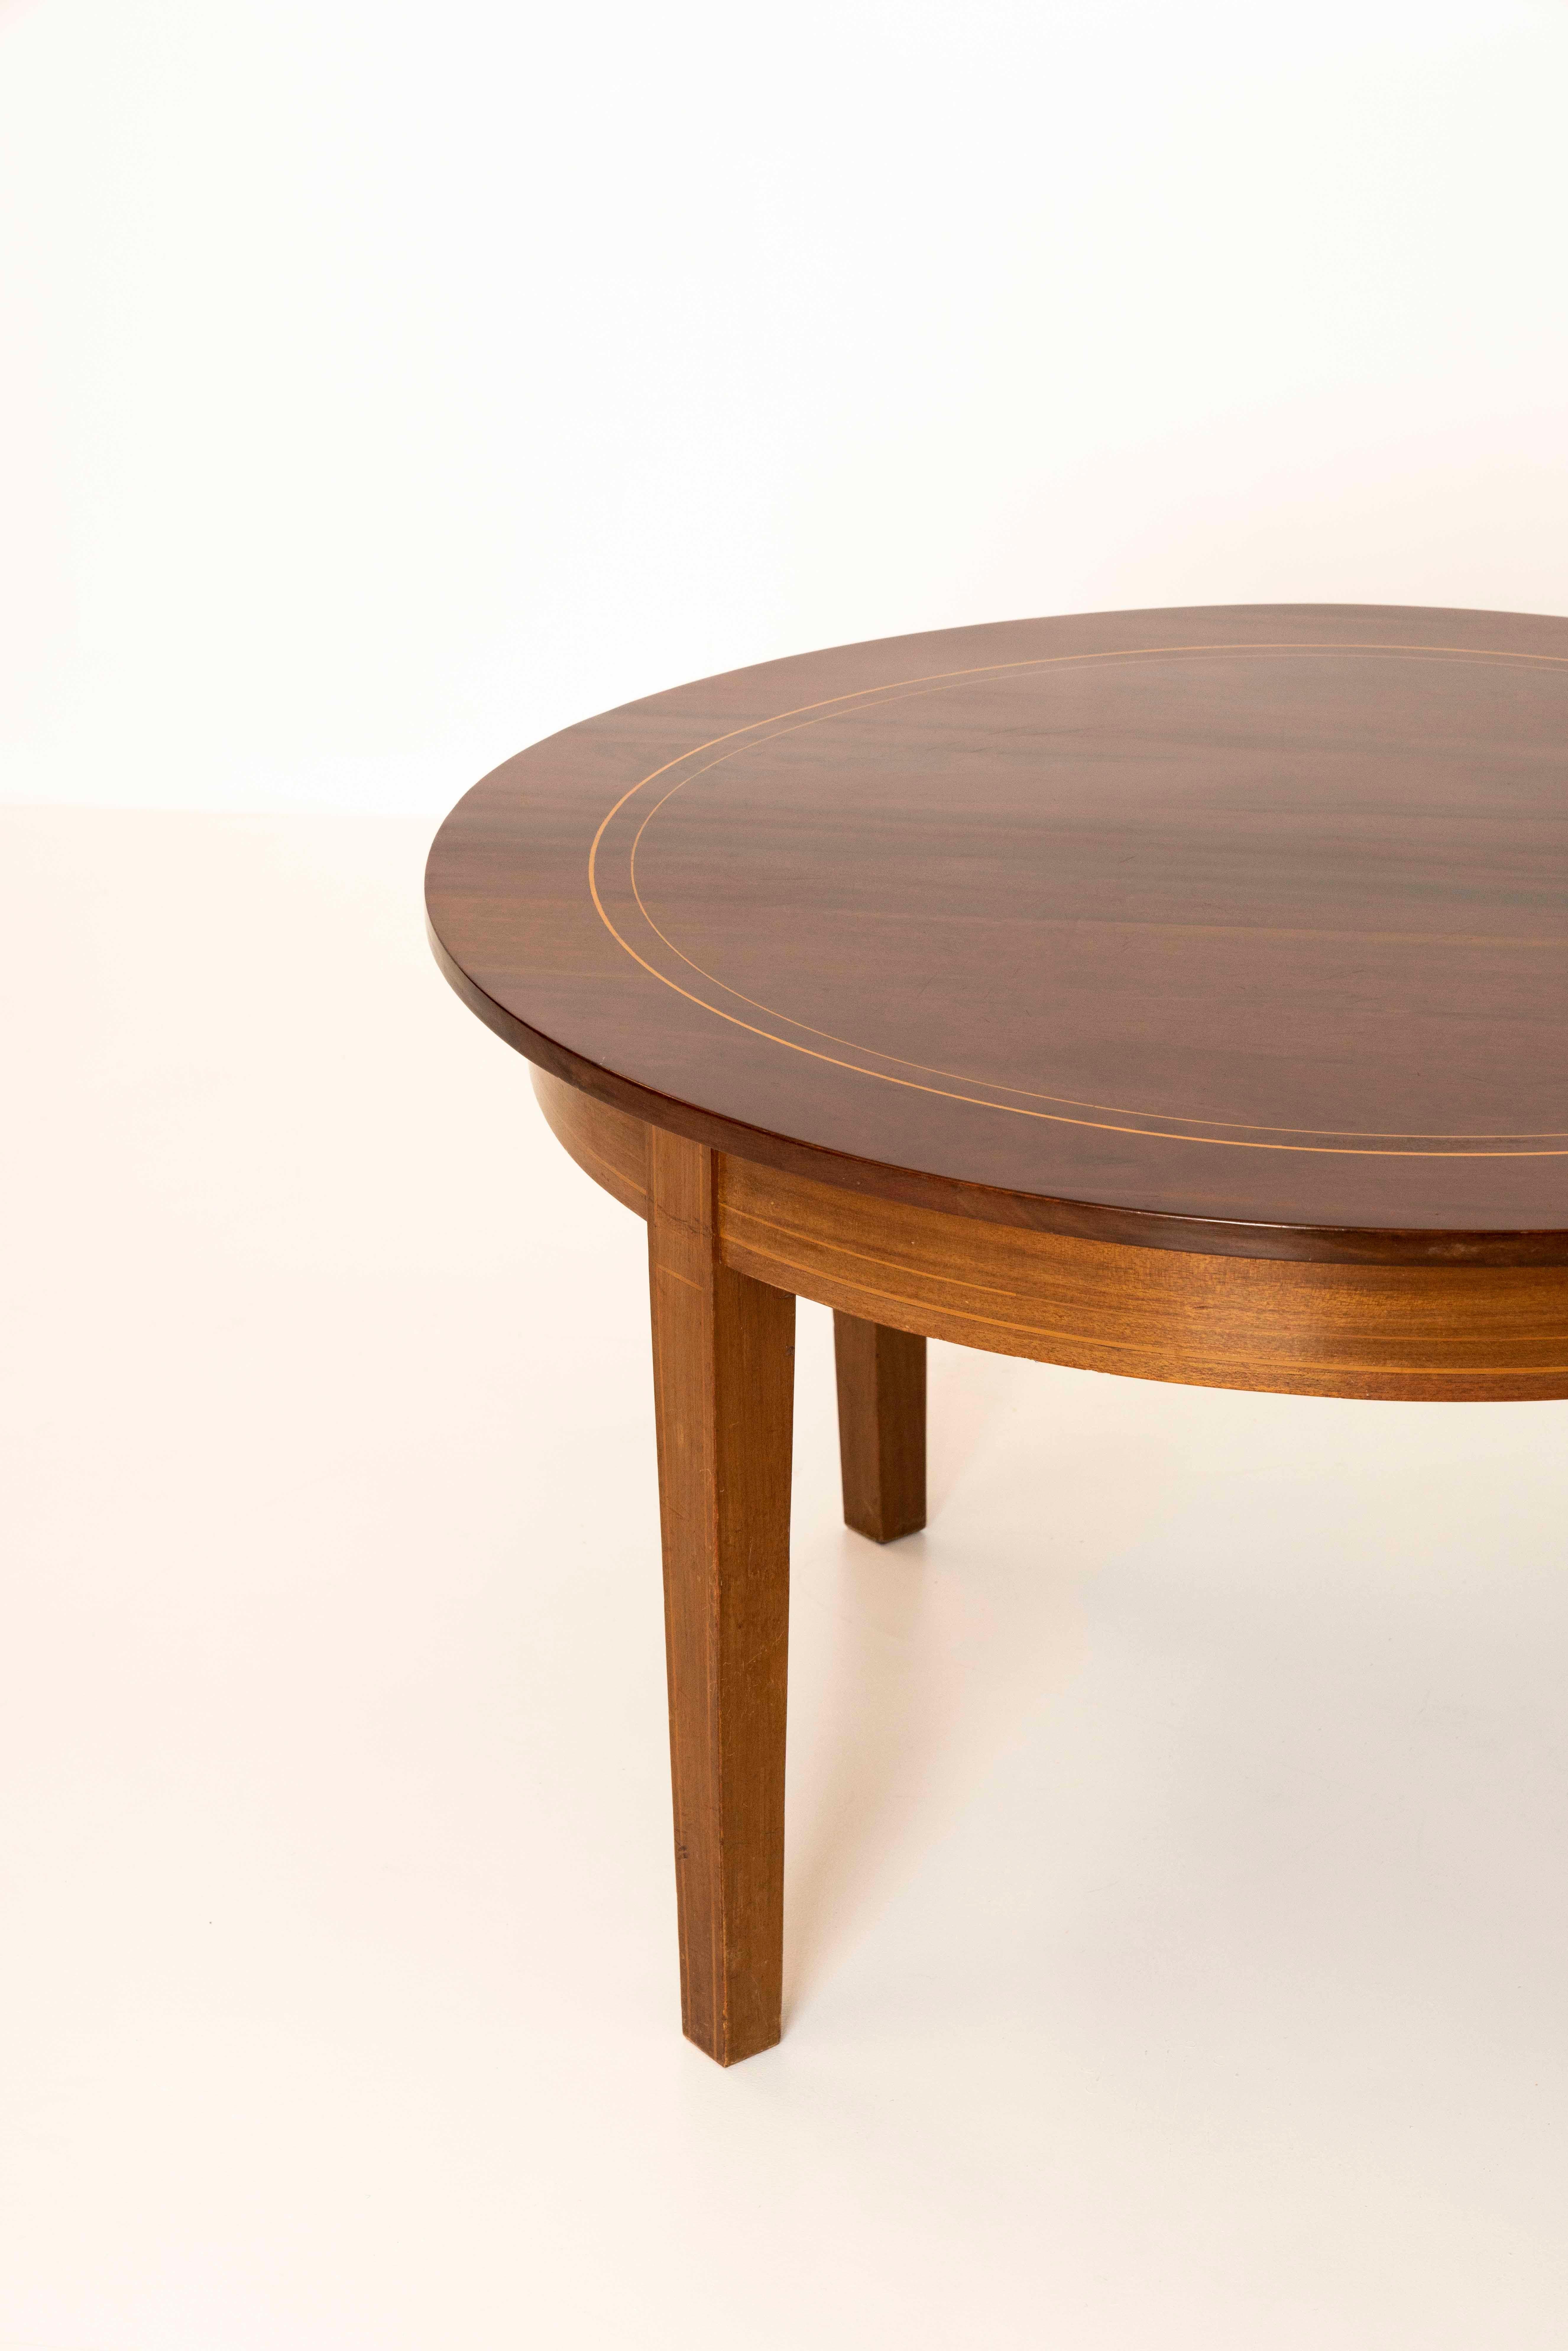 Danish Round Coffee Table in Mahogany, 1960s In Good Condition For Sale In Hellouw, NL